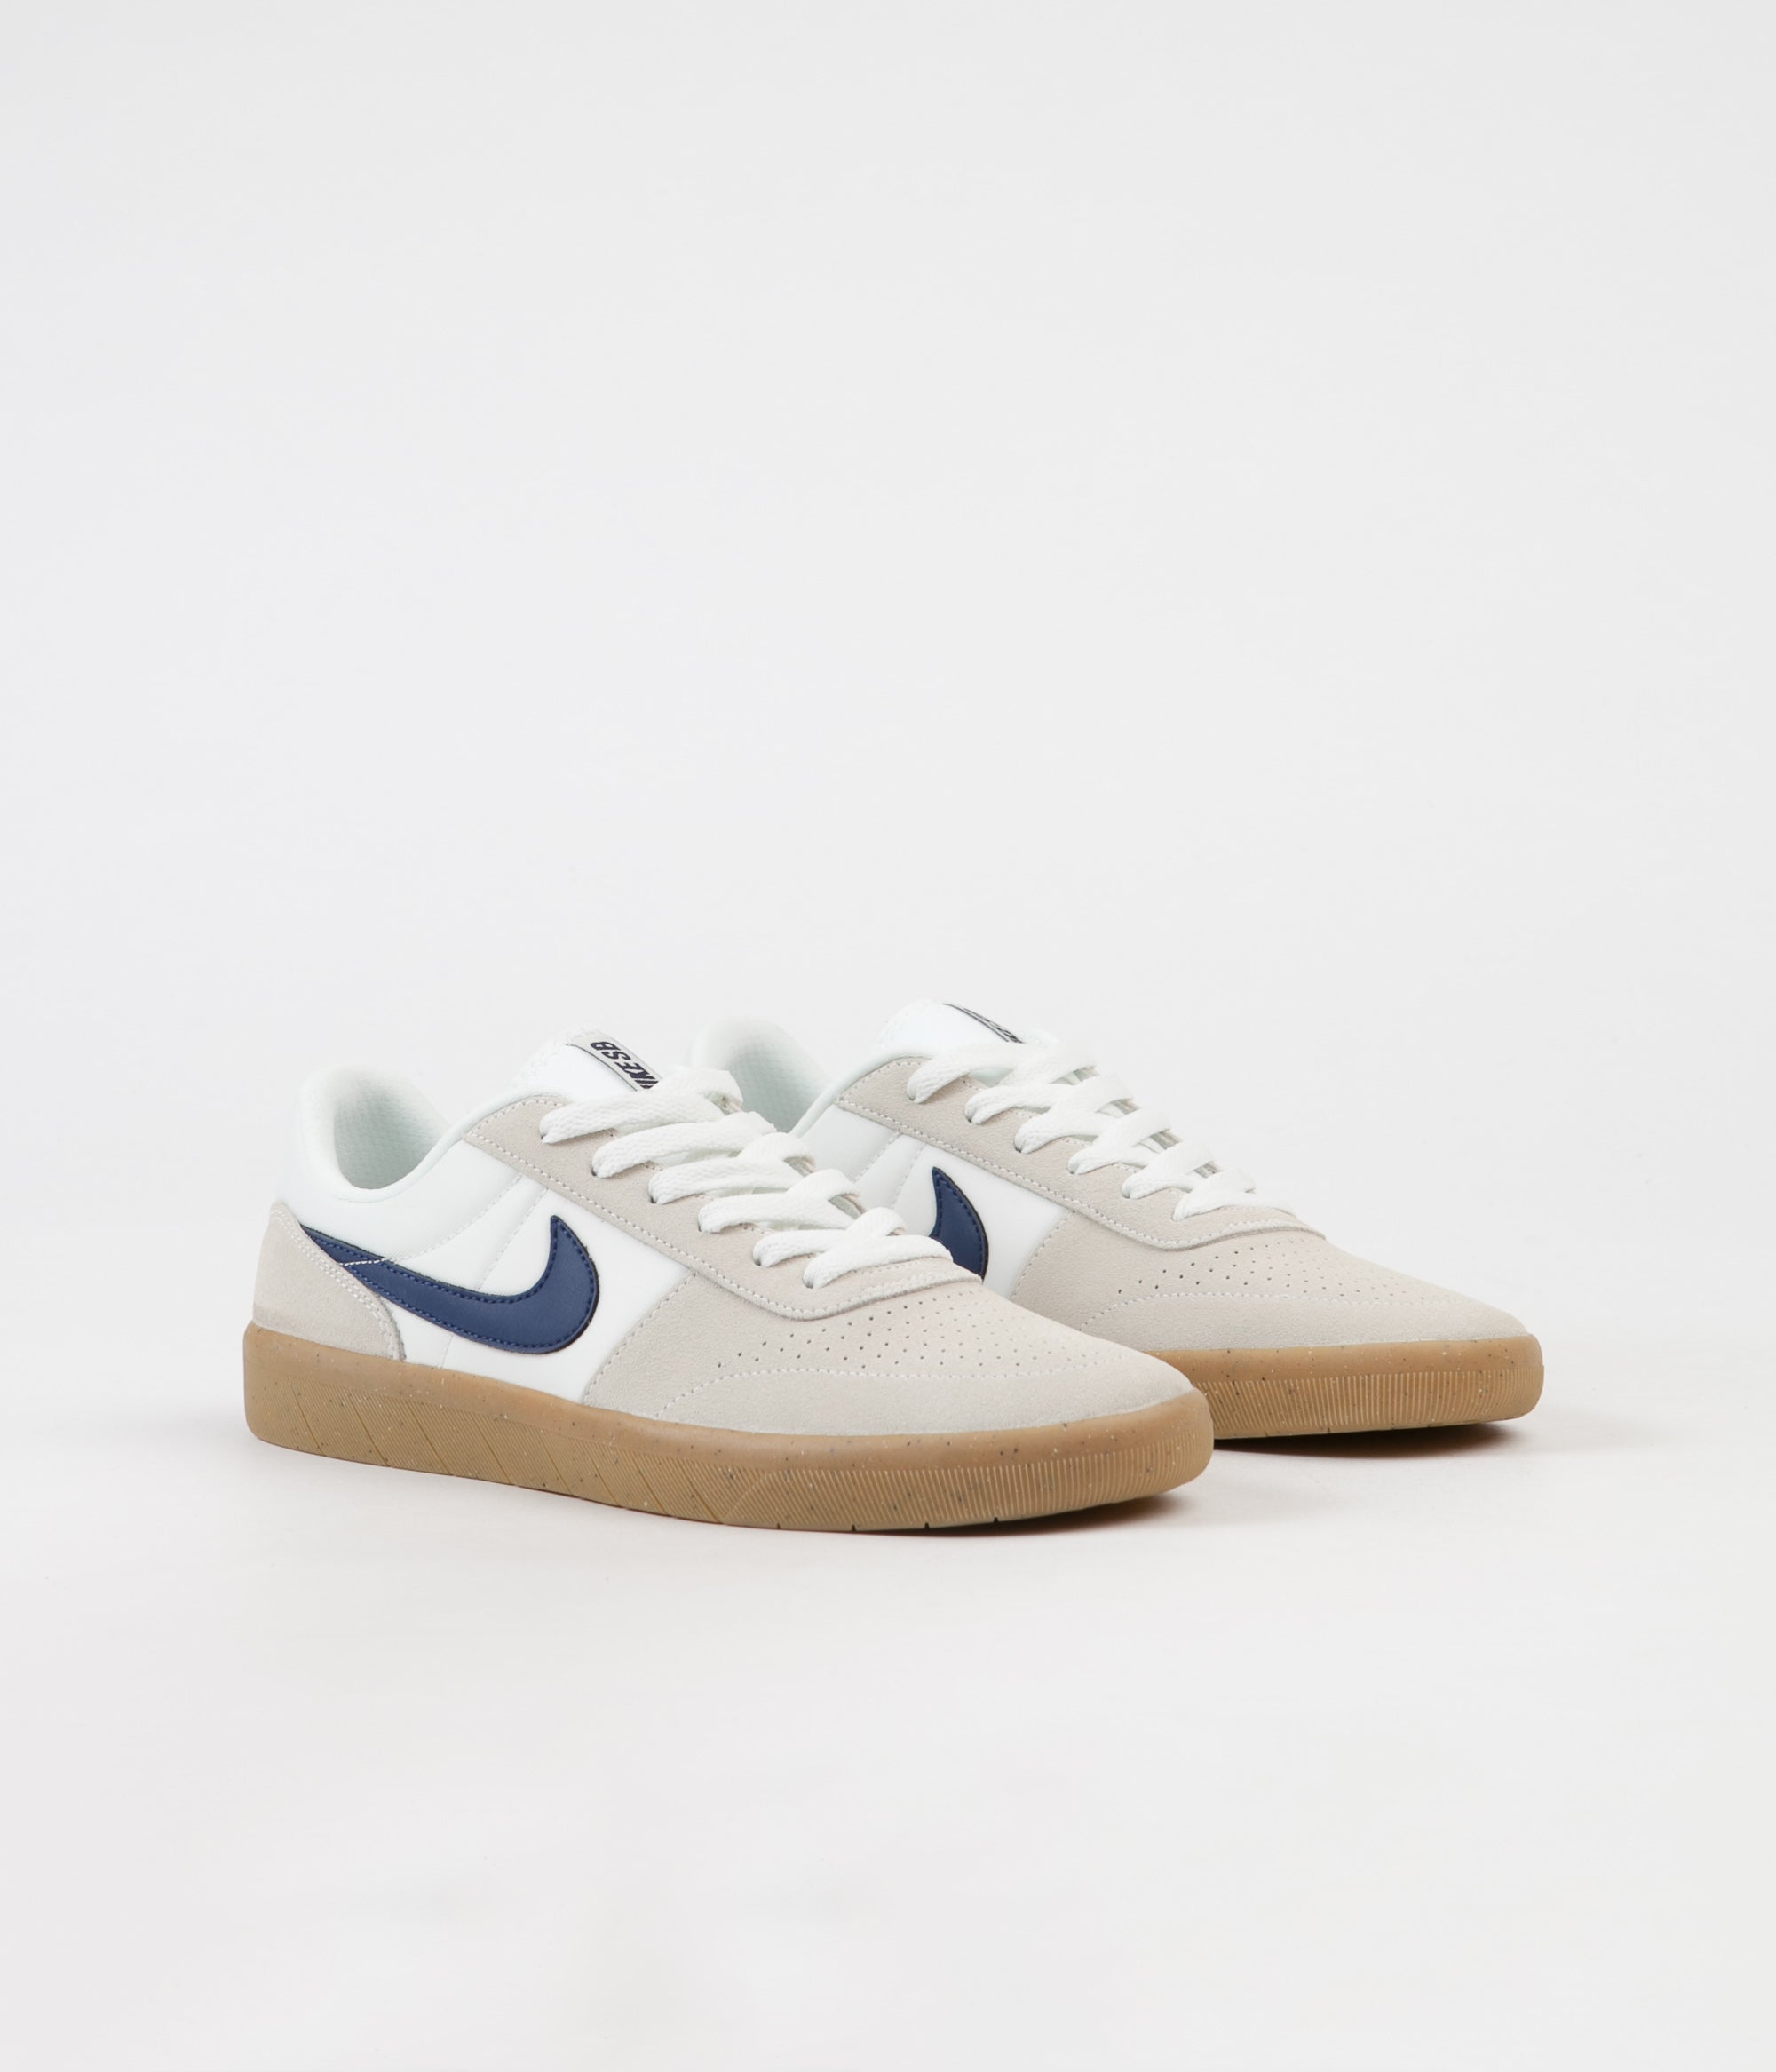 nike sb shoes white and blue